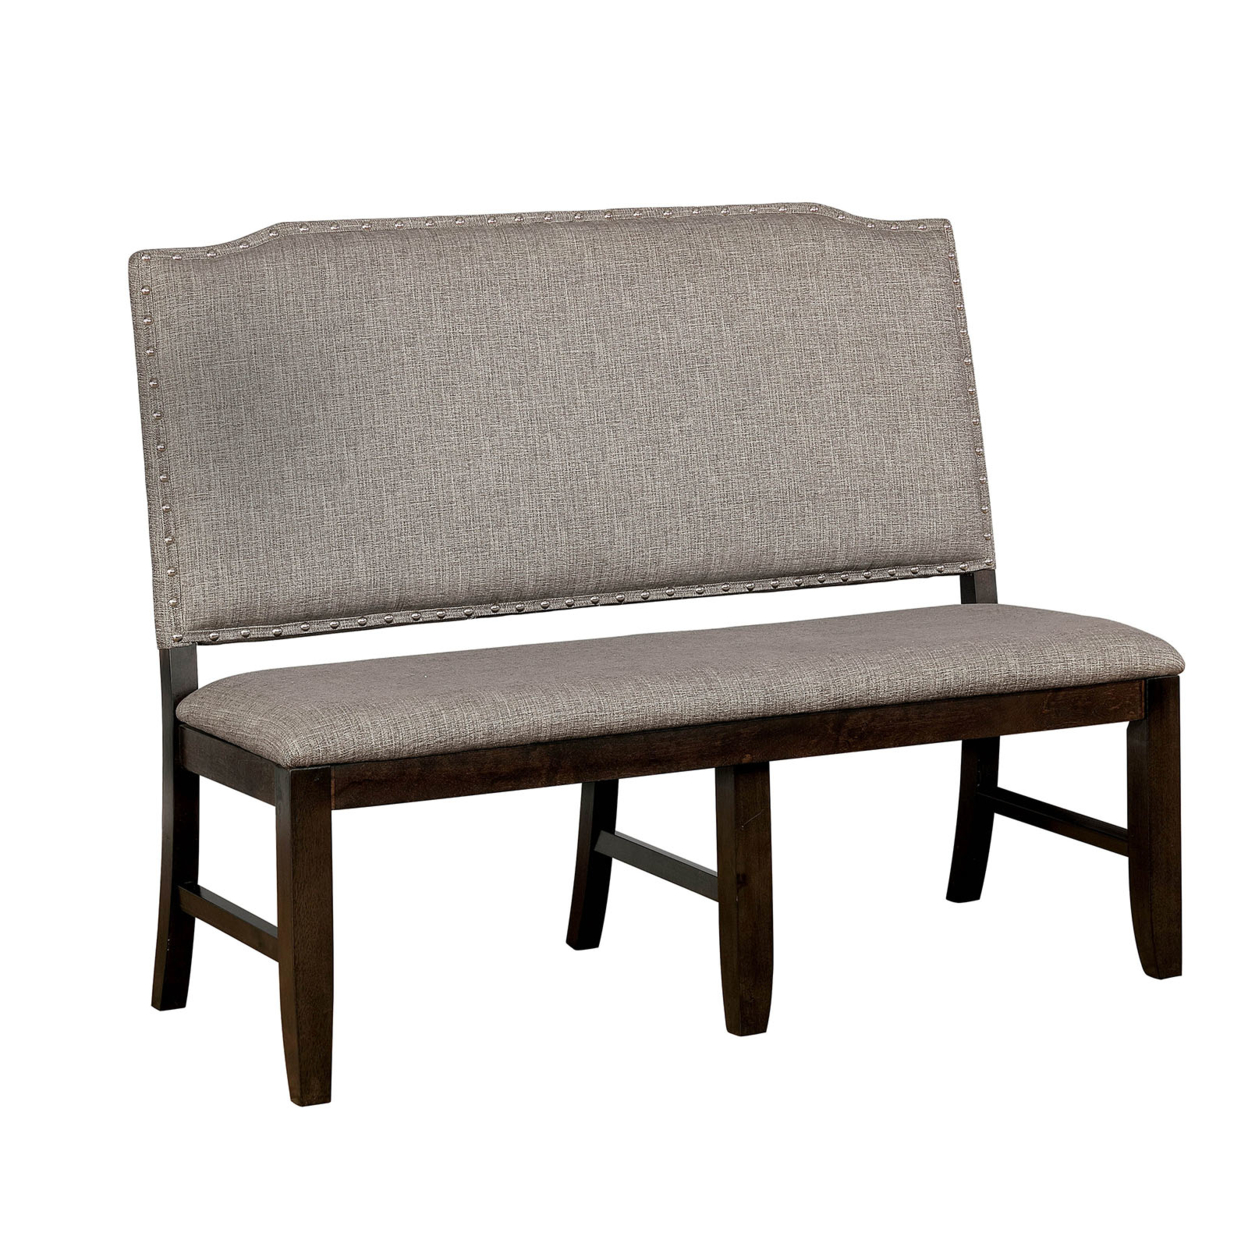 Fabric Upholstered Wooden Bench With Nail Head Trim, Gray And Brown- Saltoro Sherpi